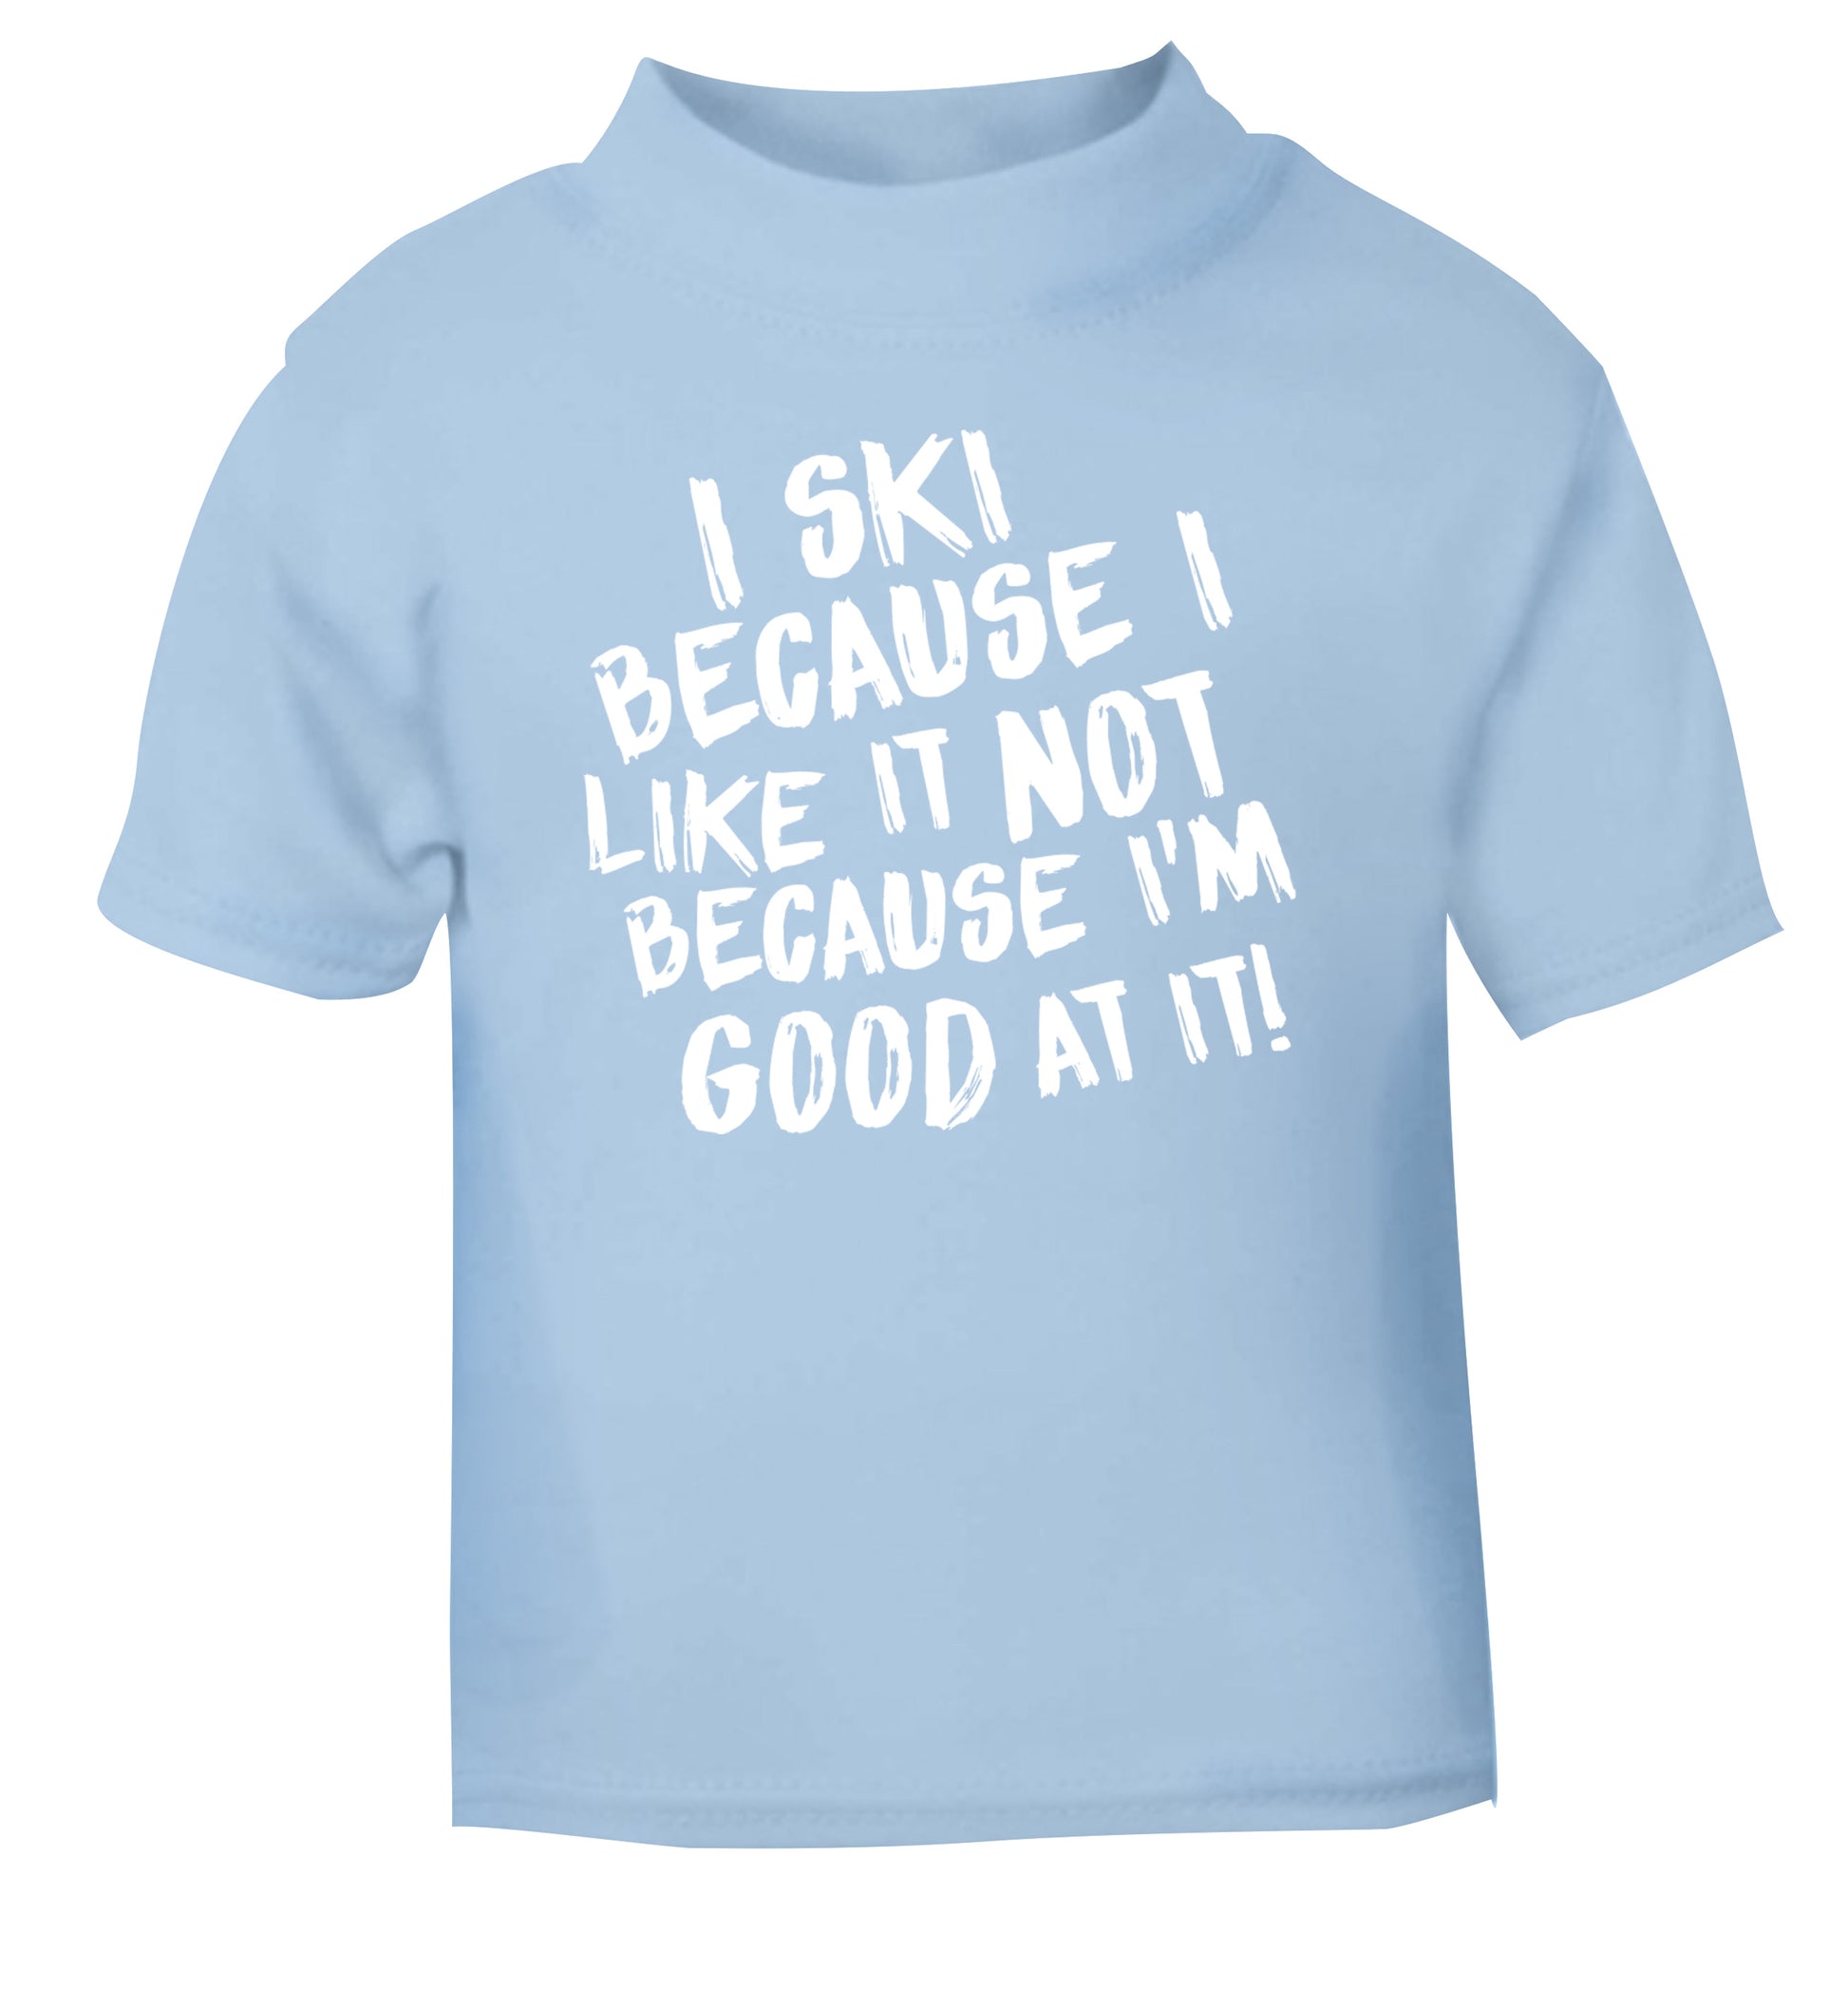 I ski because I like it not because I'm good at it light blue Baby Toddler Tshirt 2 Years